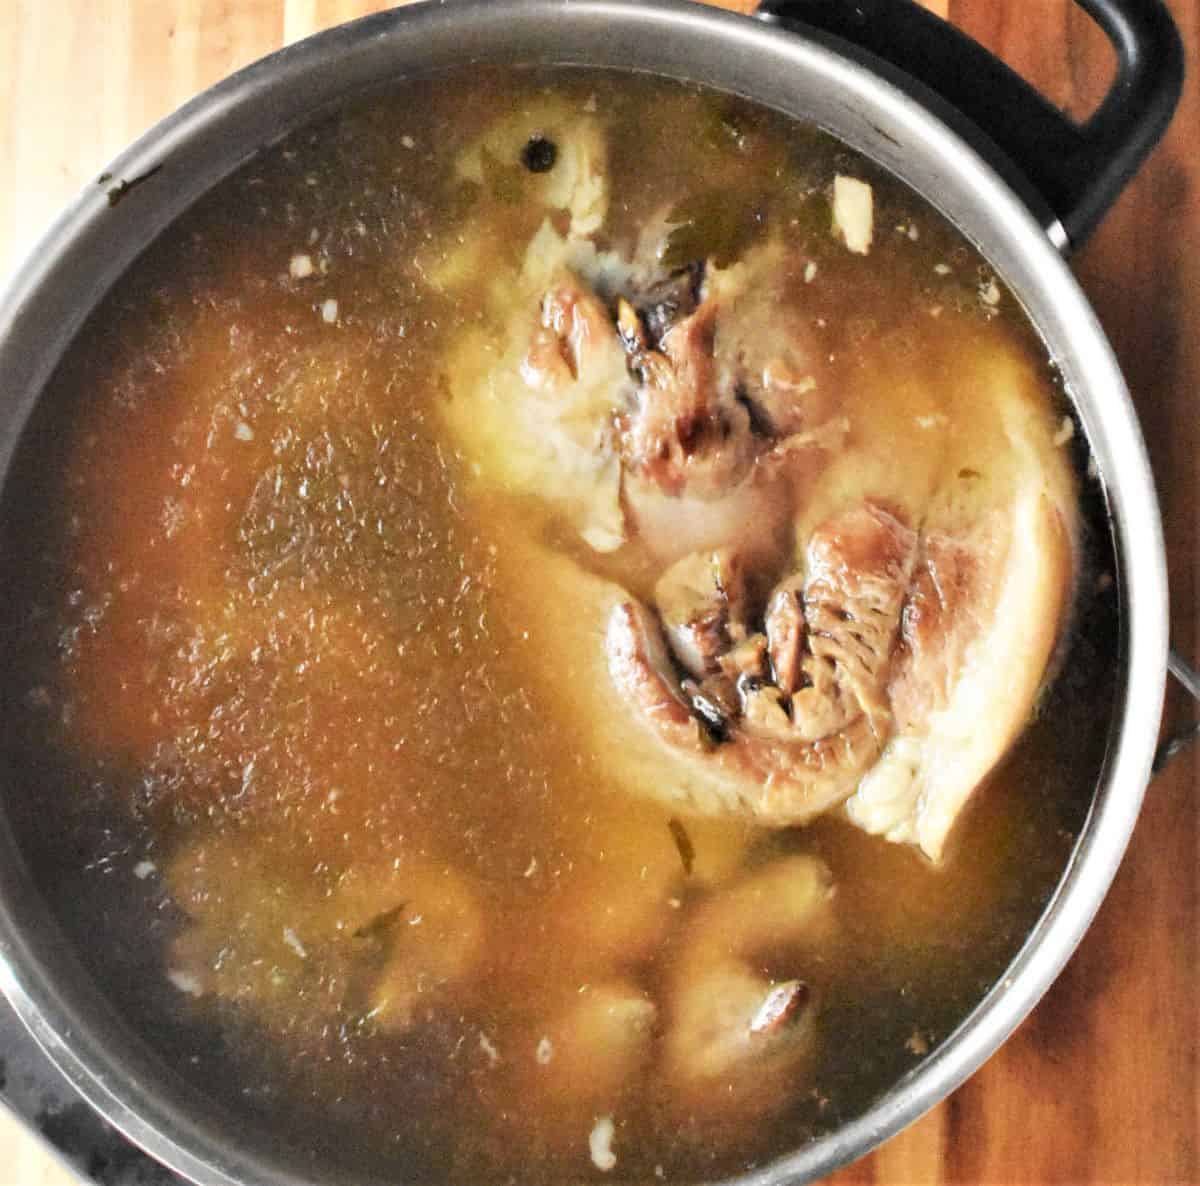 Top down view of cooked pork shank in broth.